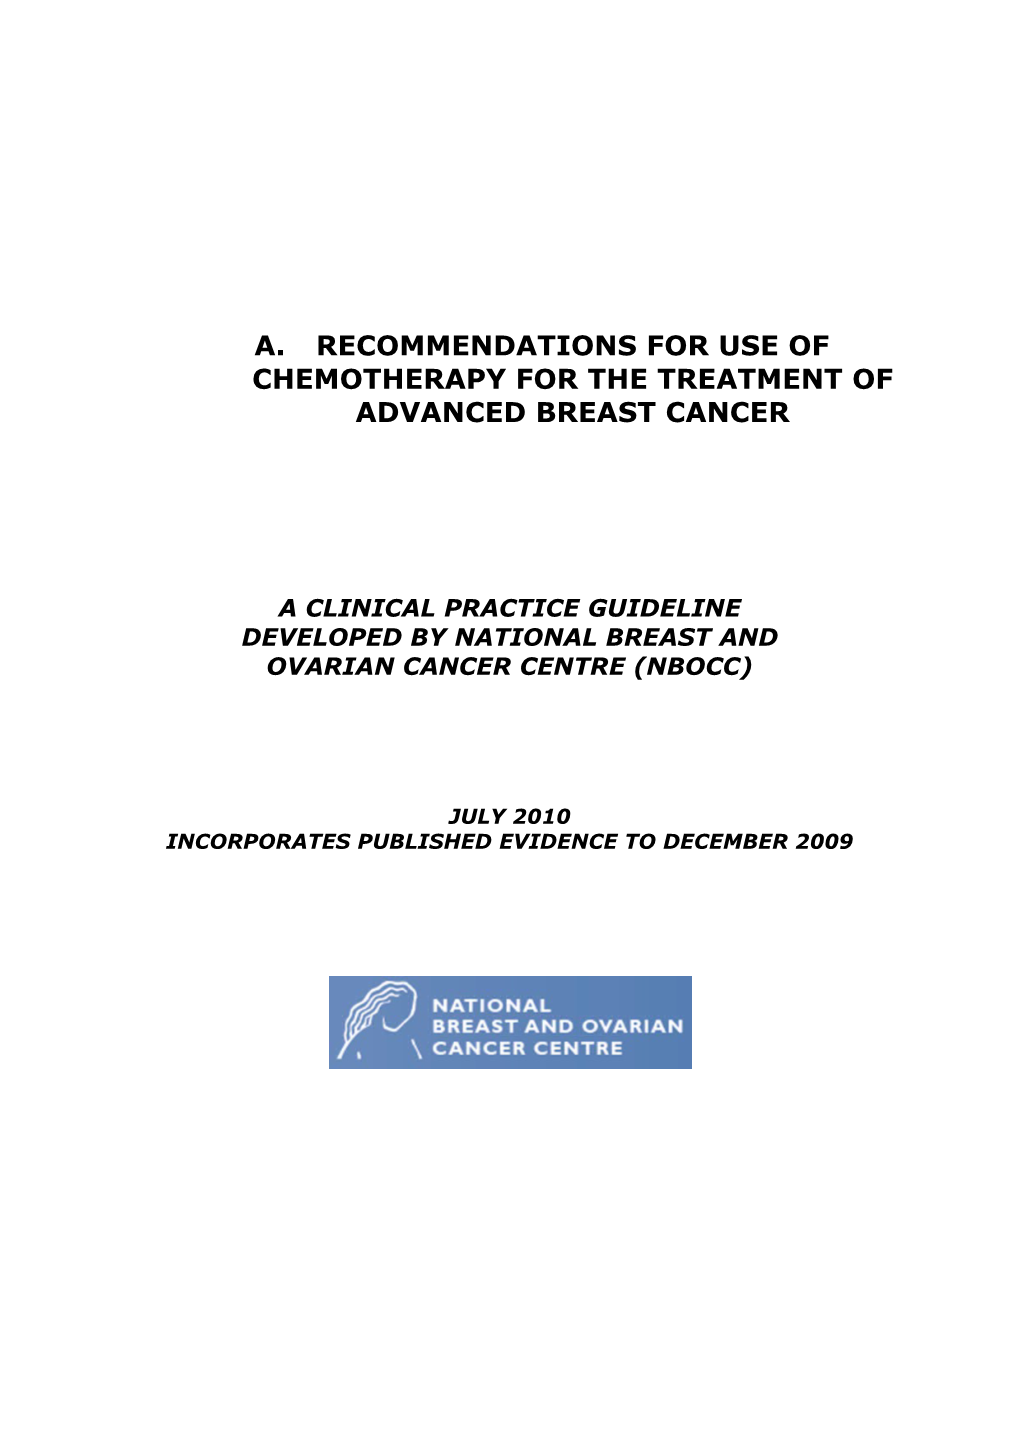 Recommendations for Use of Chemotherapy for the Treatment of Advanced Breast Cancer